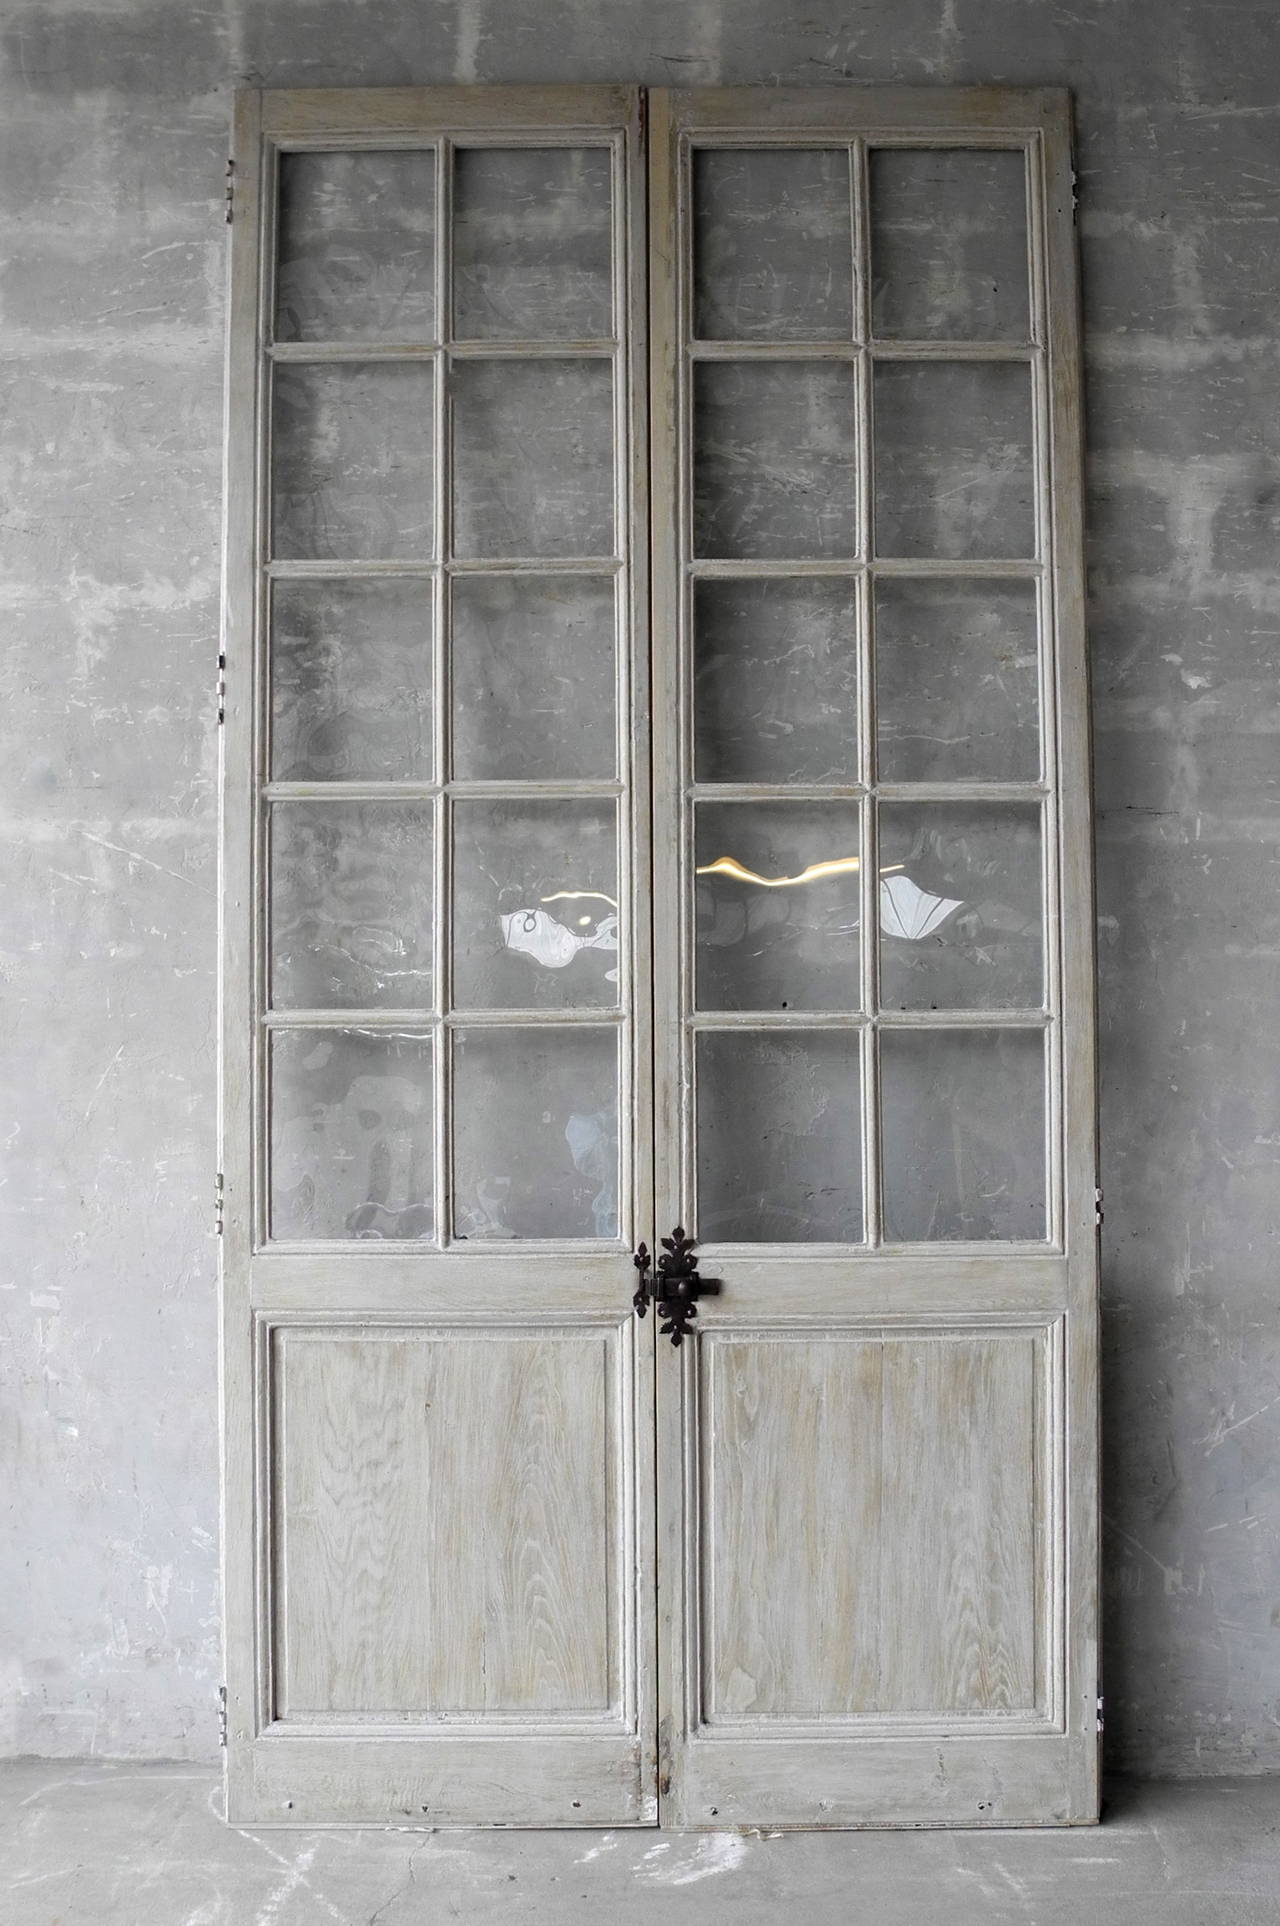 Pair of tall, antique 19th century, provençal French Doors with glass and antique slide bolt. 

At over 9 feet high, these doors boast an impressive stature while the twenty panes of glass retain their sense of elegance. 

The antique slide bolt